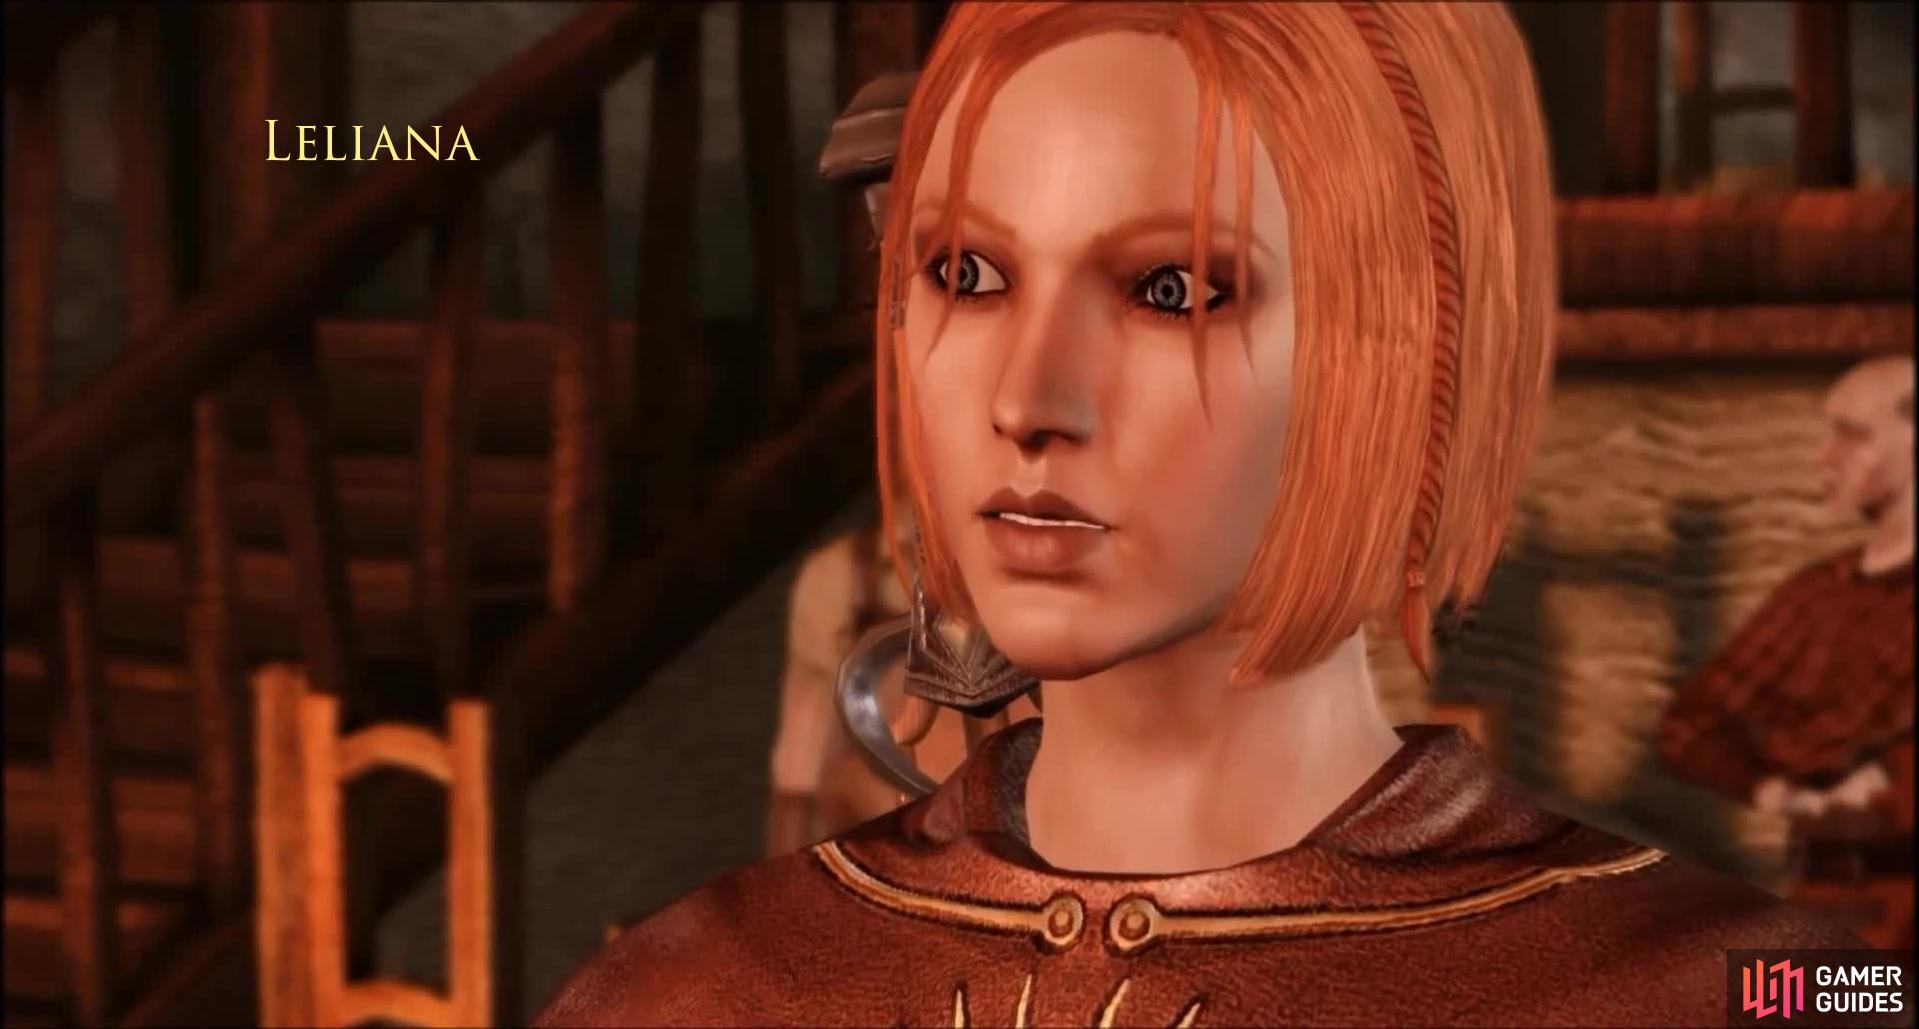 Leliana is the pious, kind, yet deadly bard of the tale. Don’t let her looks deceive you.